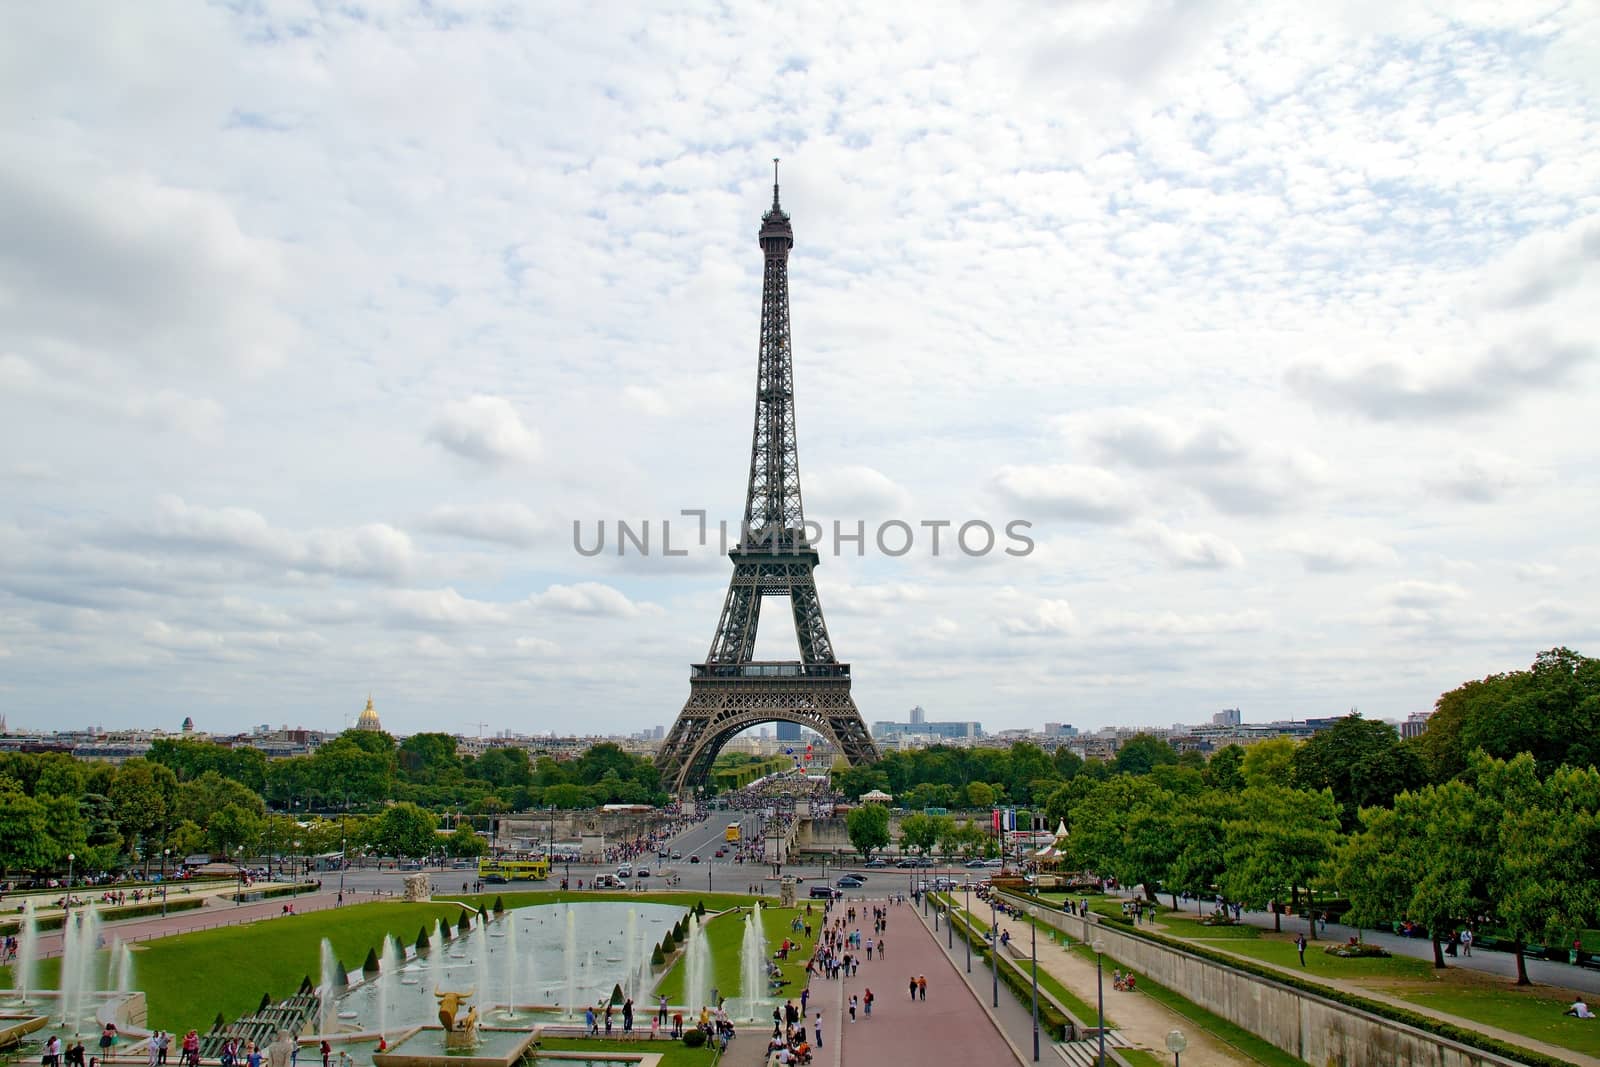 Eiffel tower and its surroundings by Dermot68